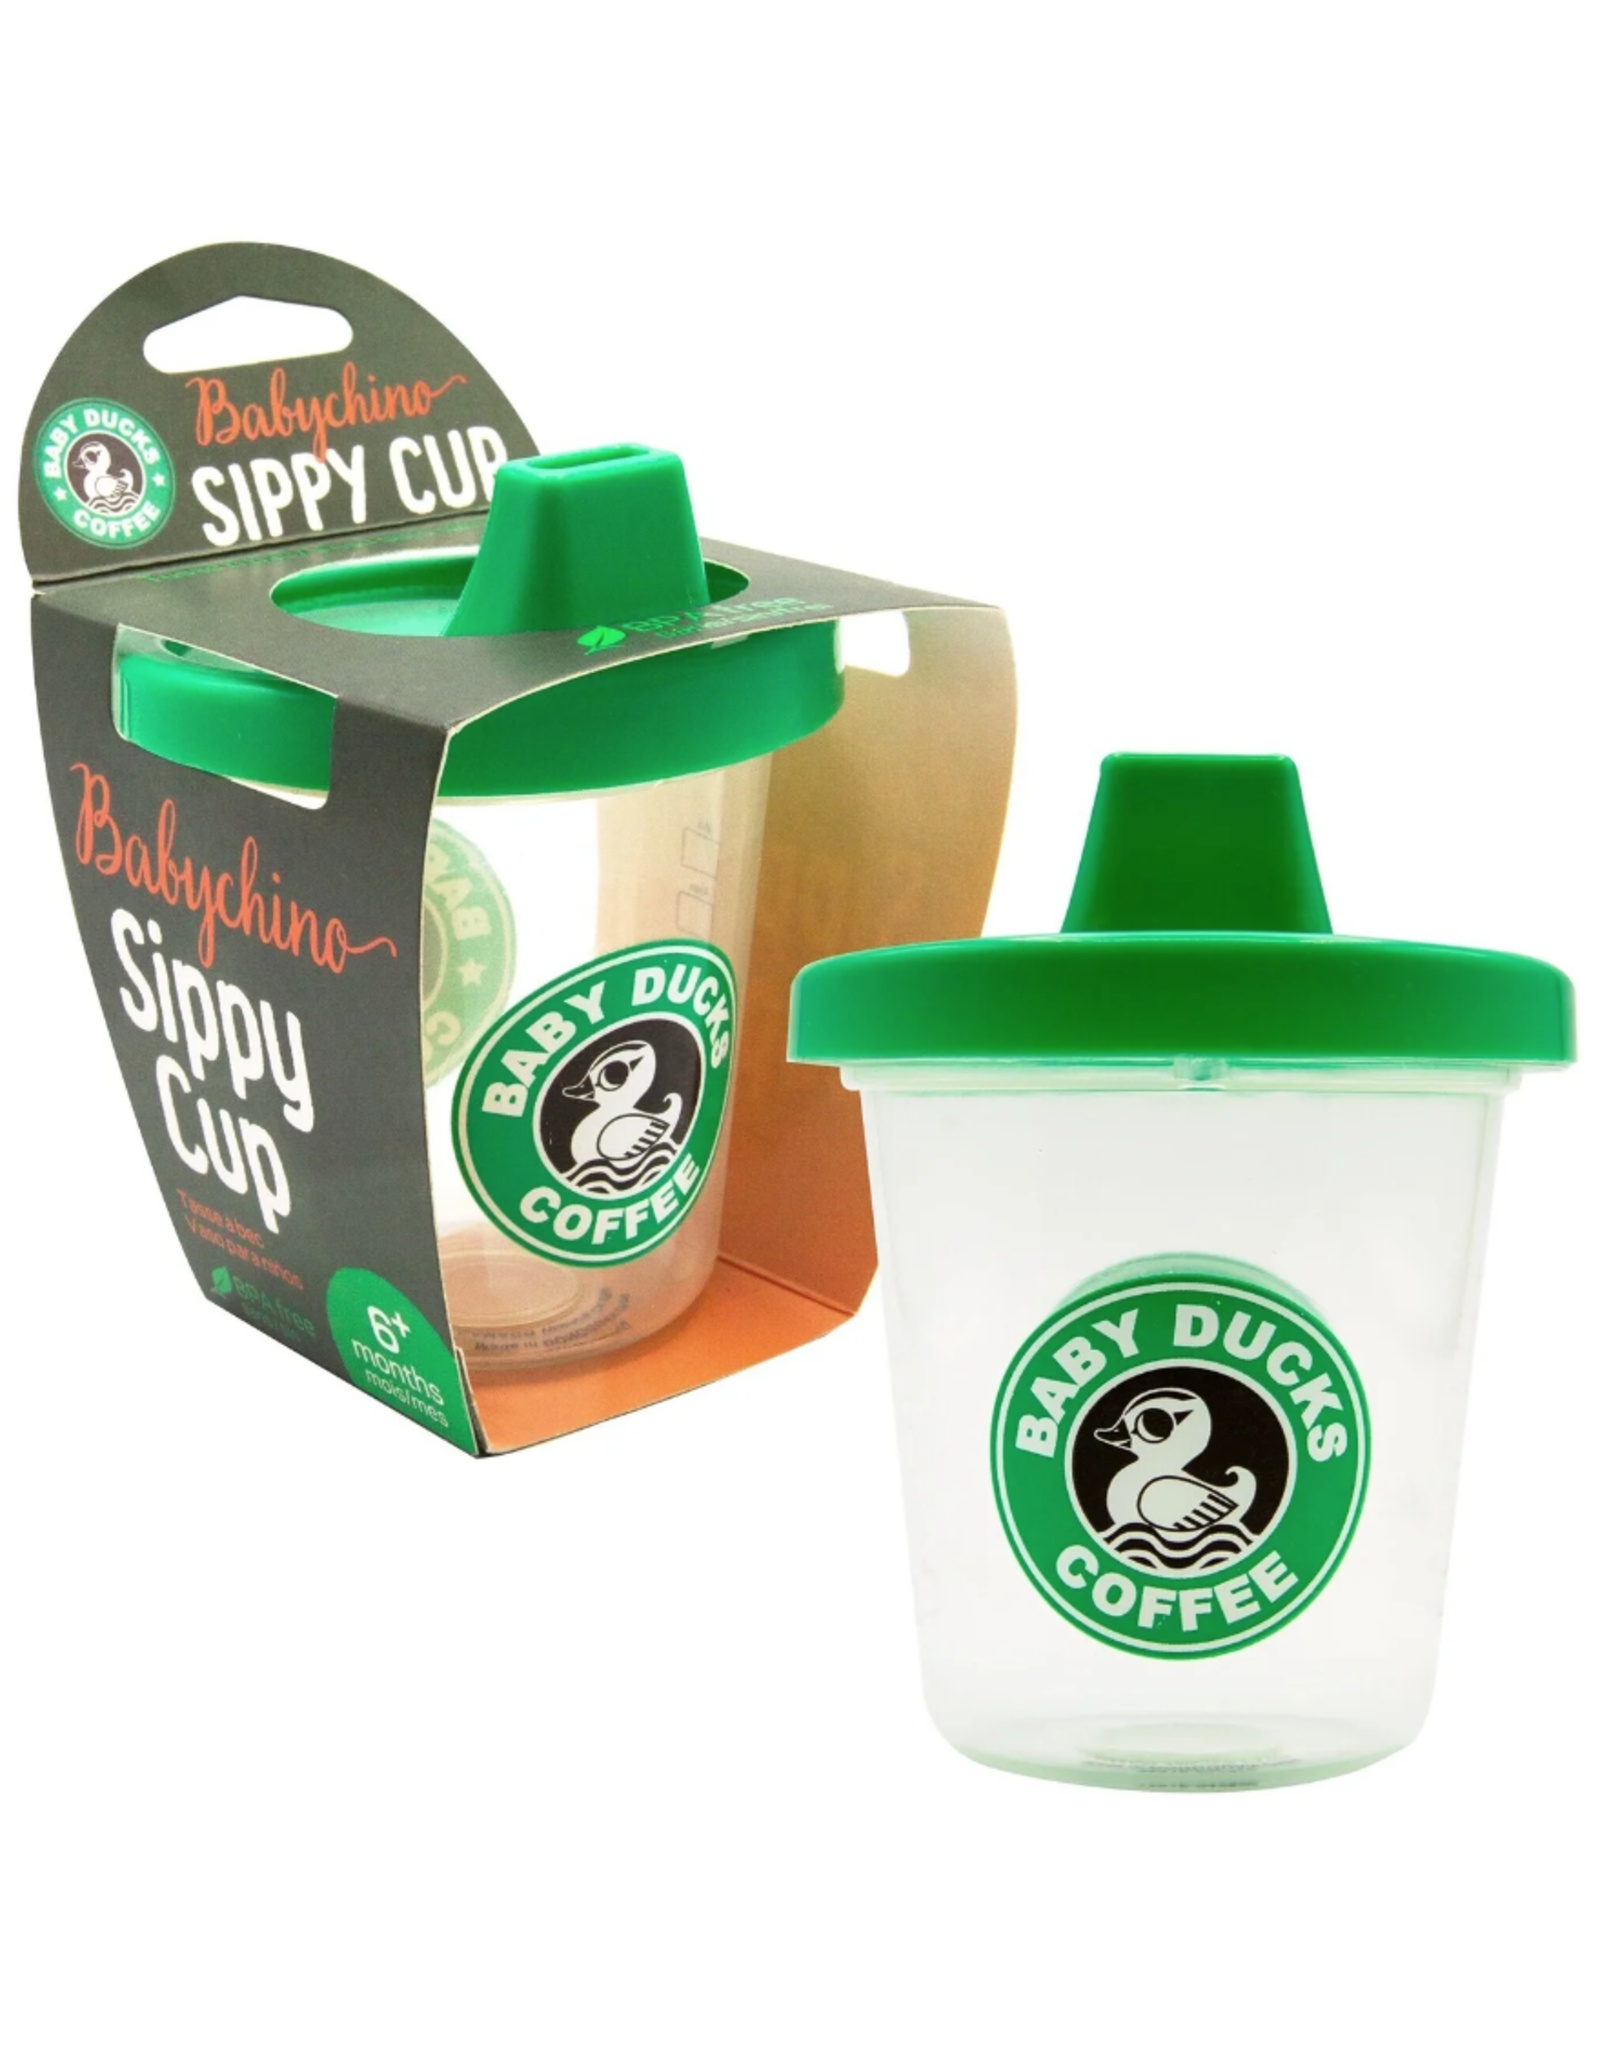 NMR Babychino Sippy Cup